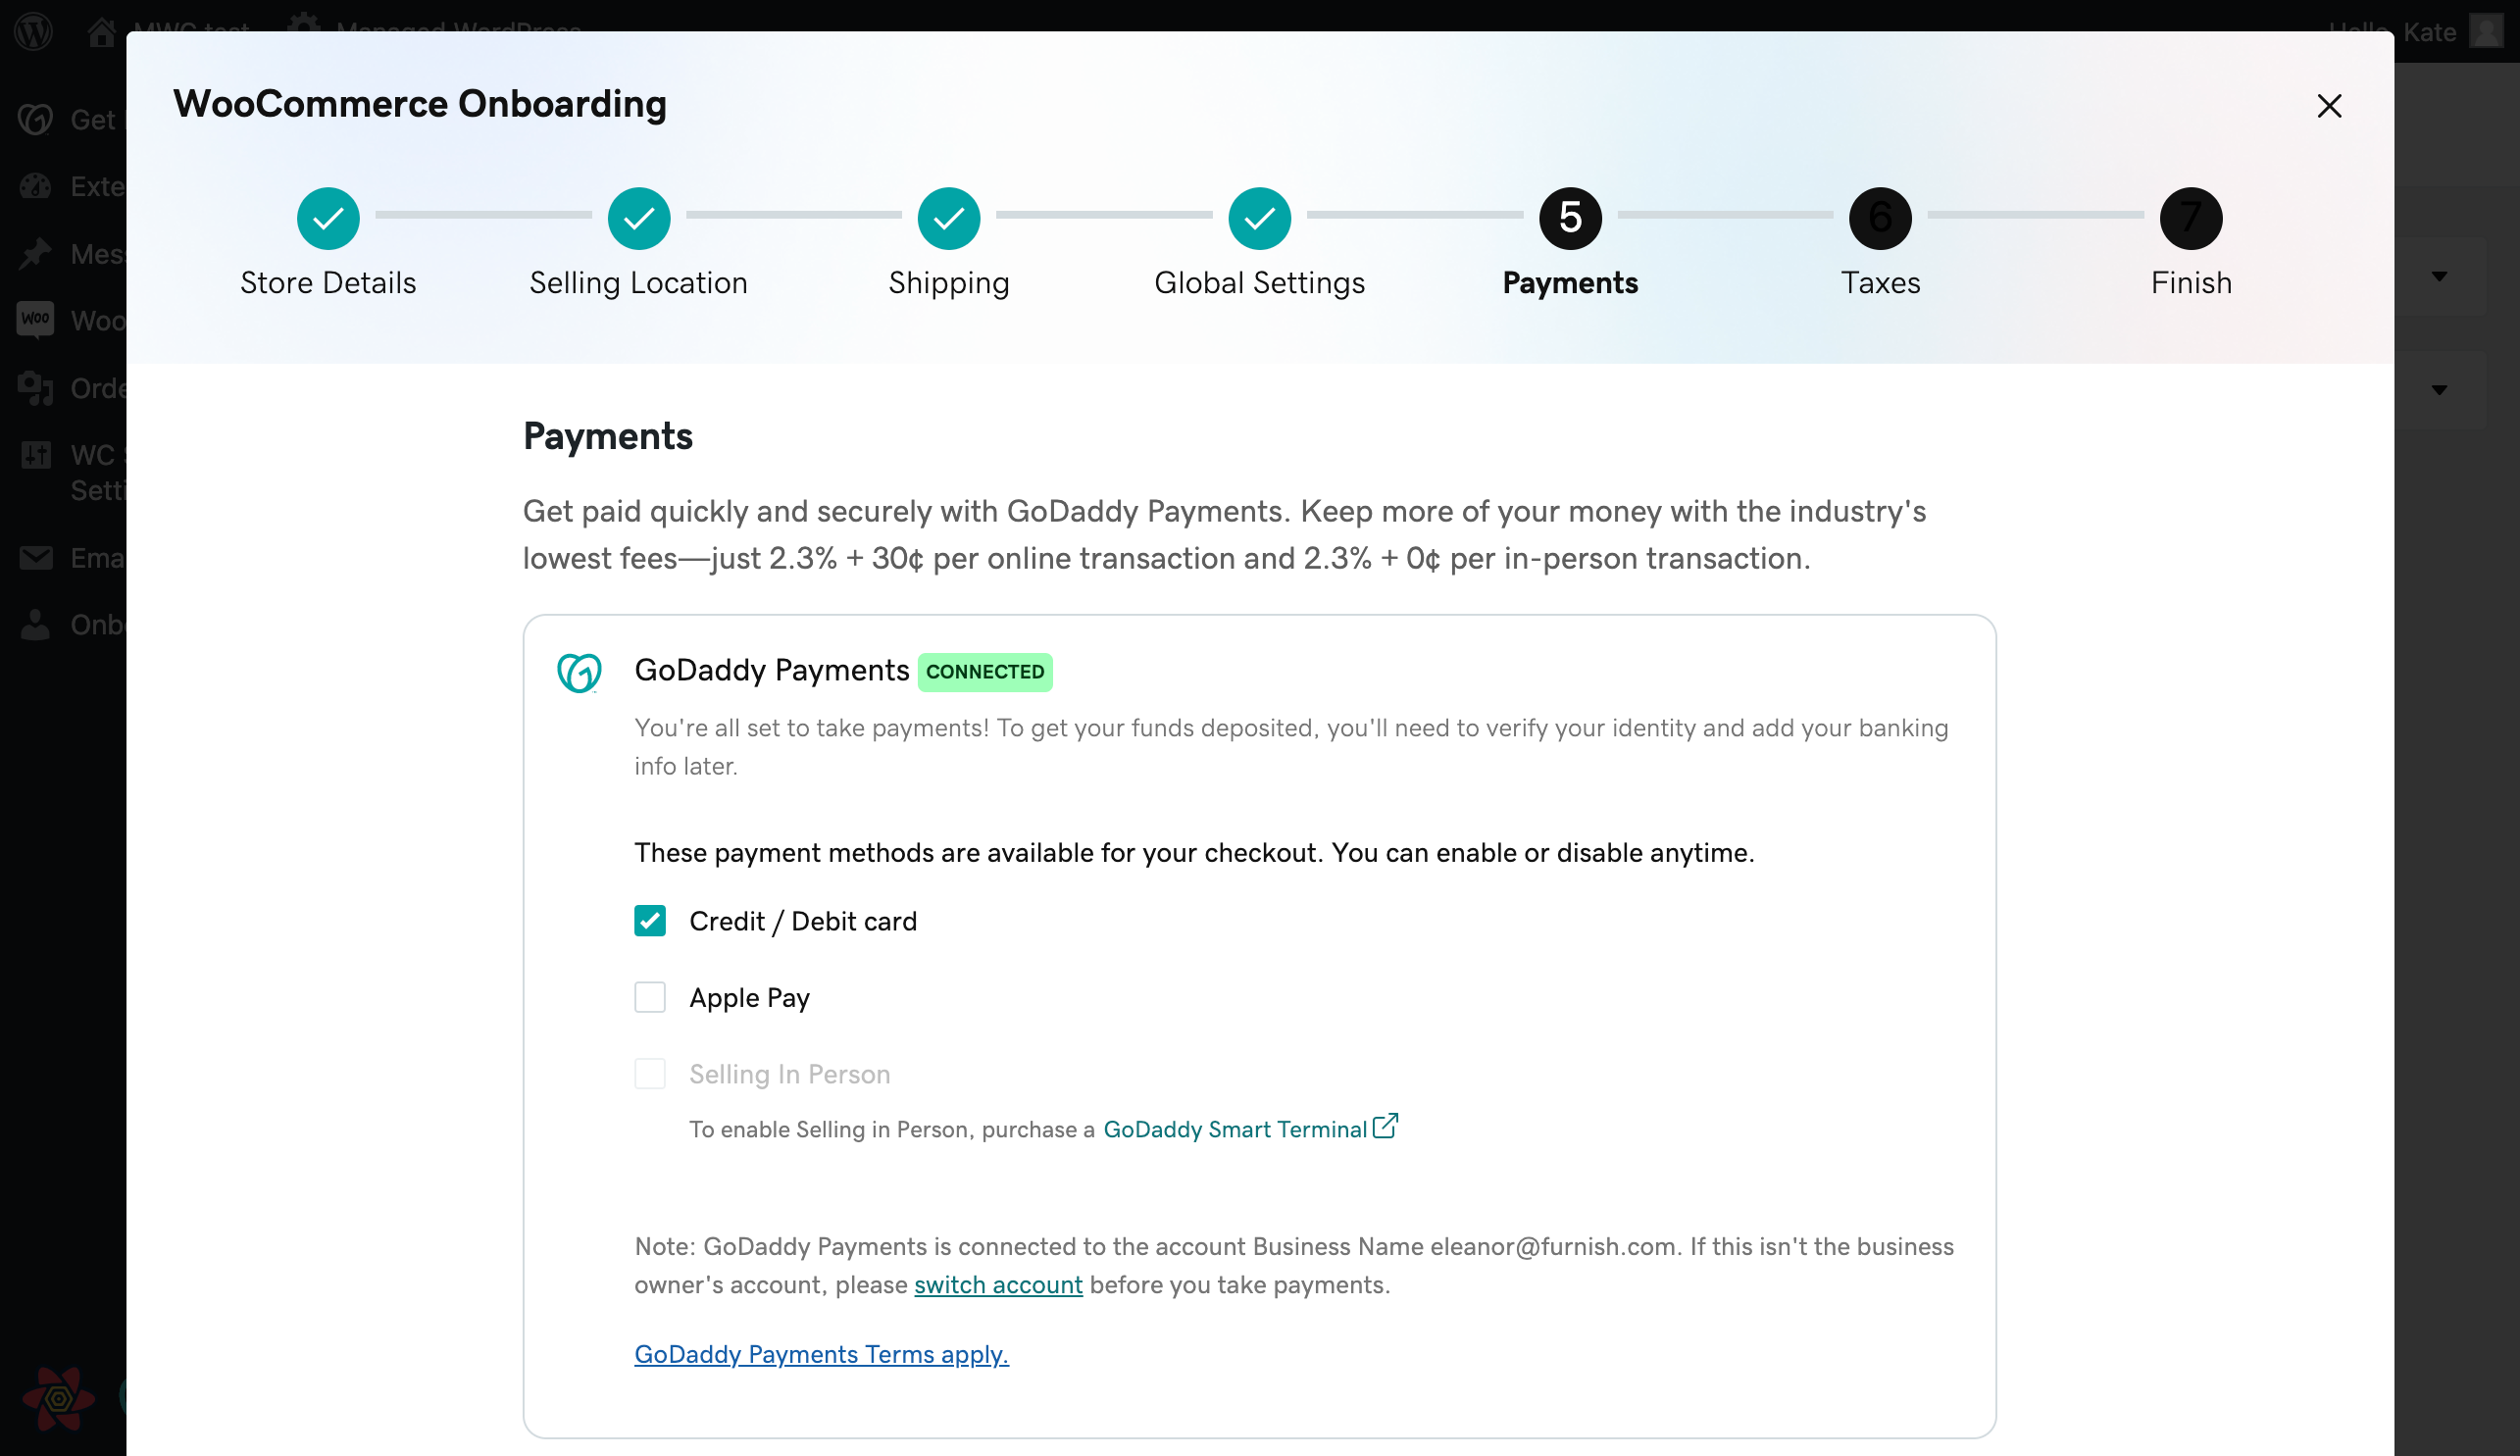 GoDaddy Payments are pre-approved and multiple payment methods are available below.